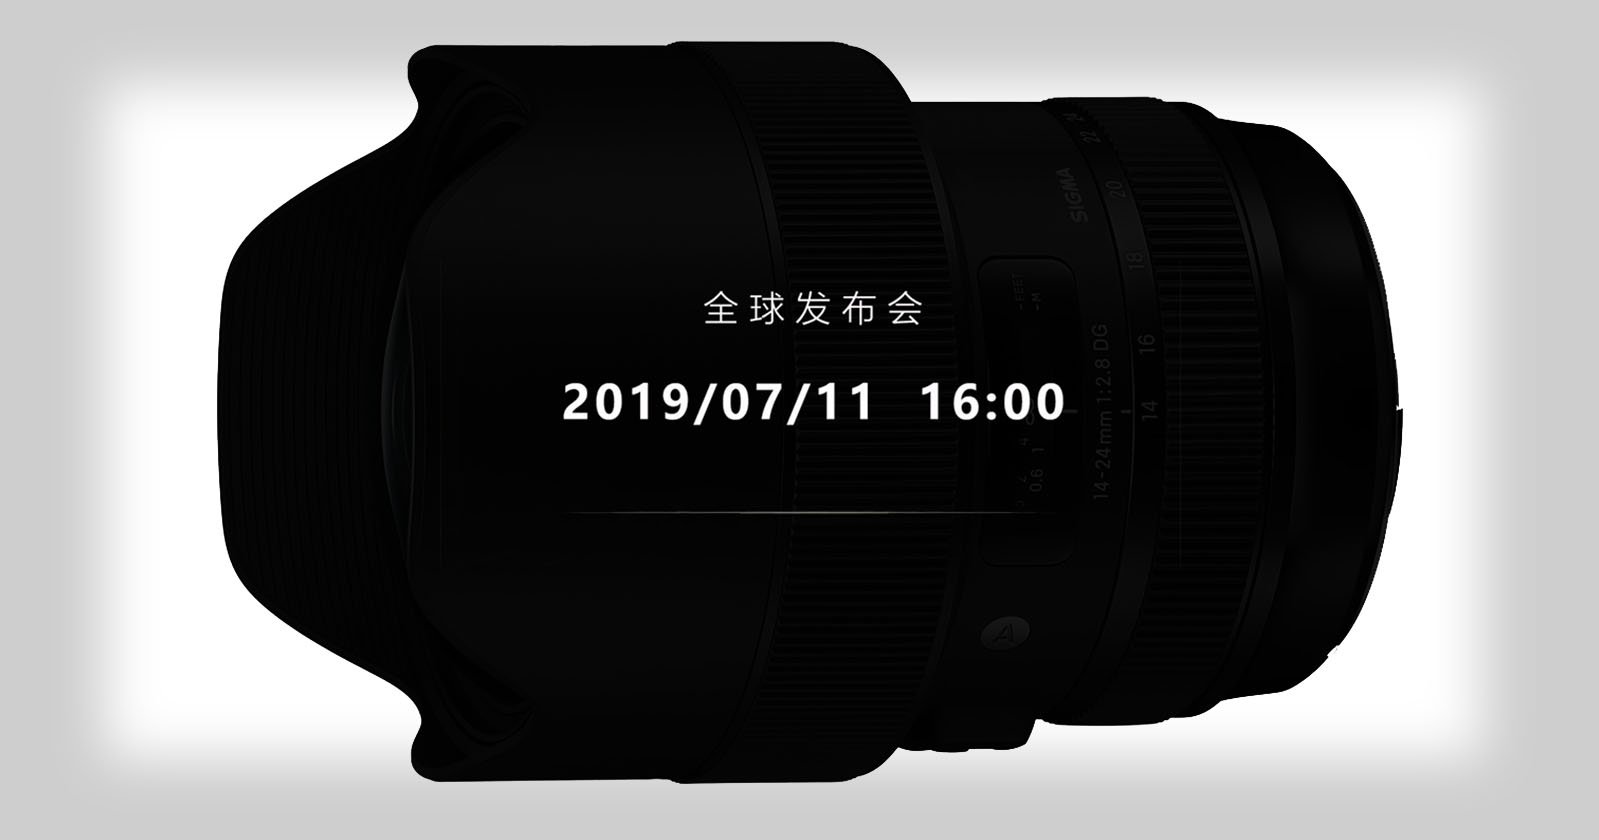 Sigma to Reveal 35mm f/1.2, 45mm f/2.8 and 14-24mm f/2.8 Next Week